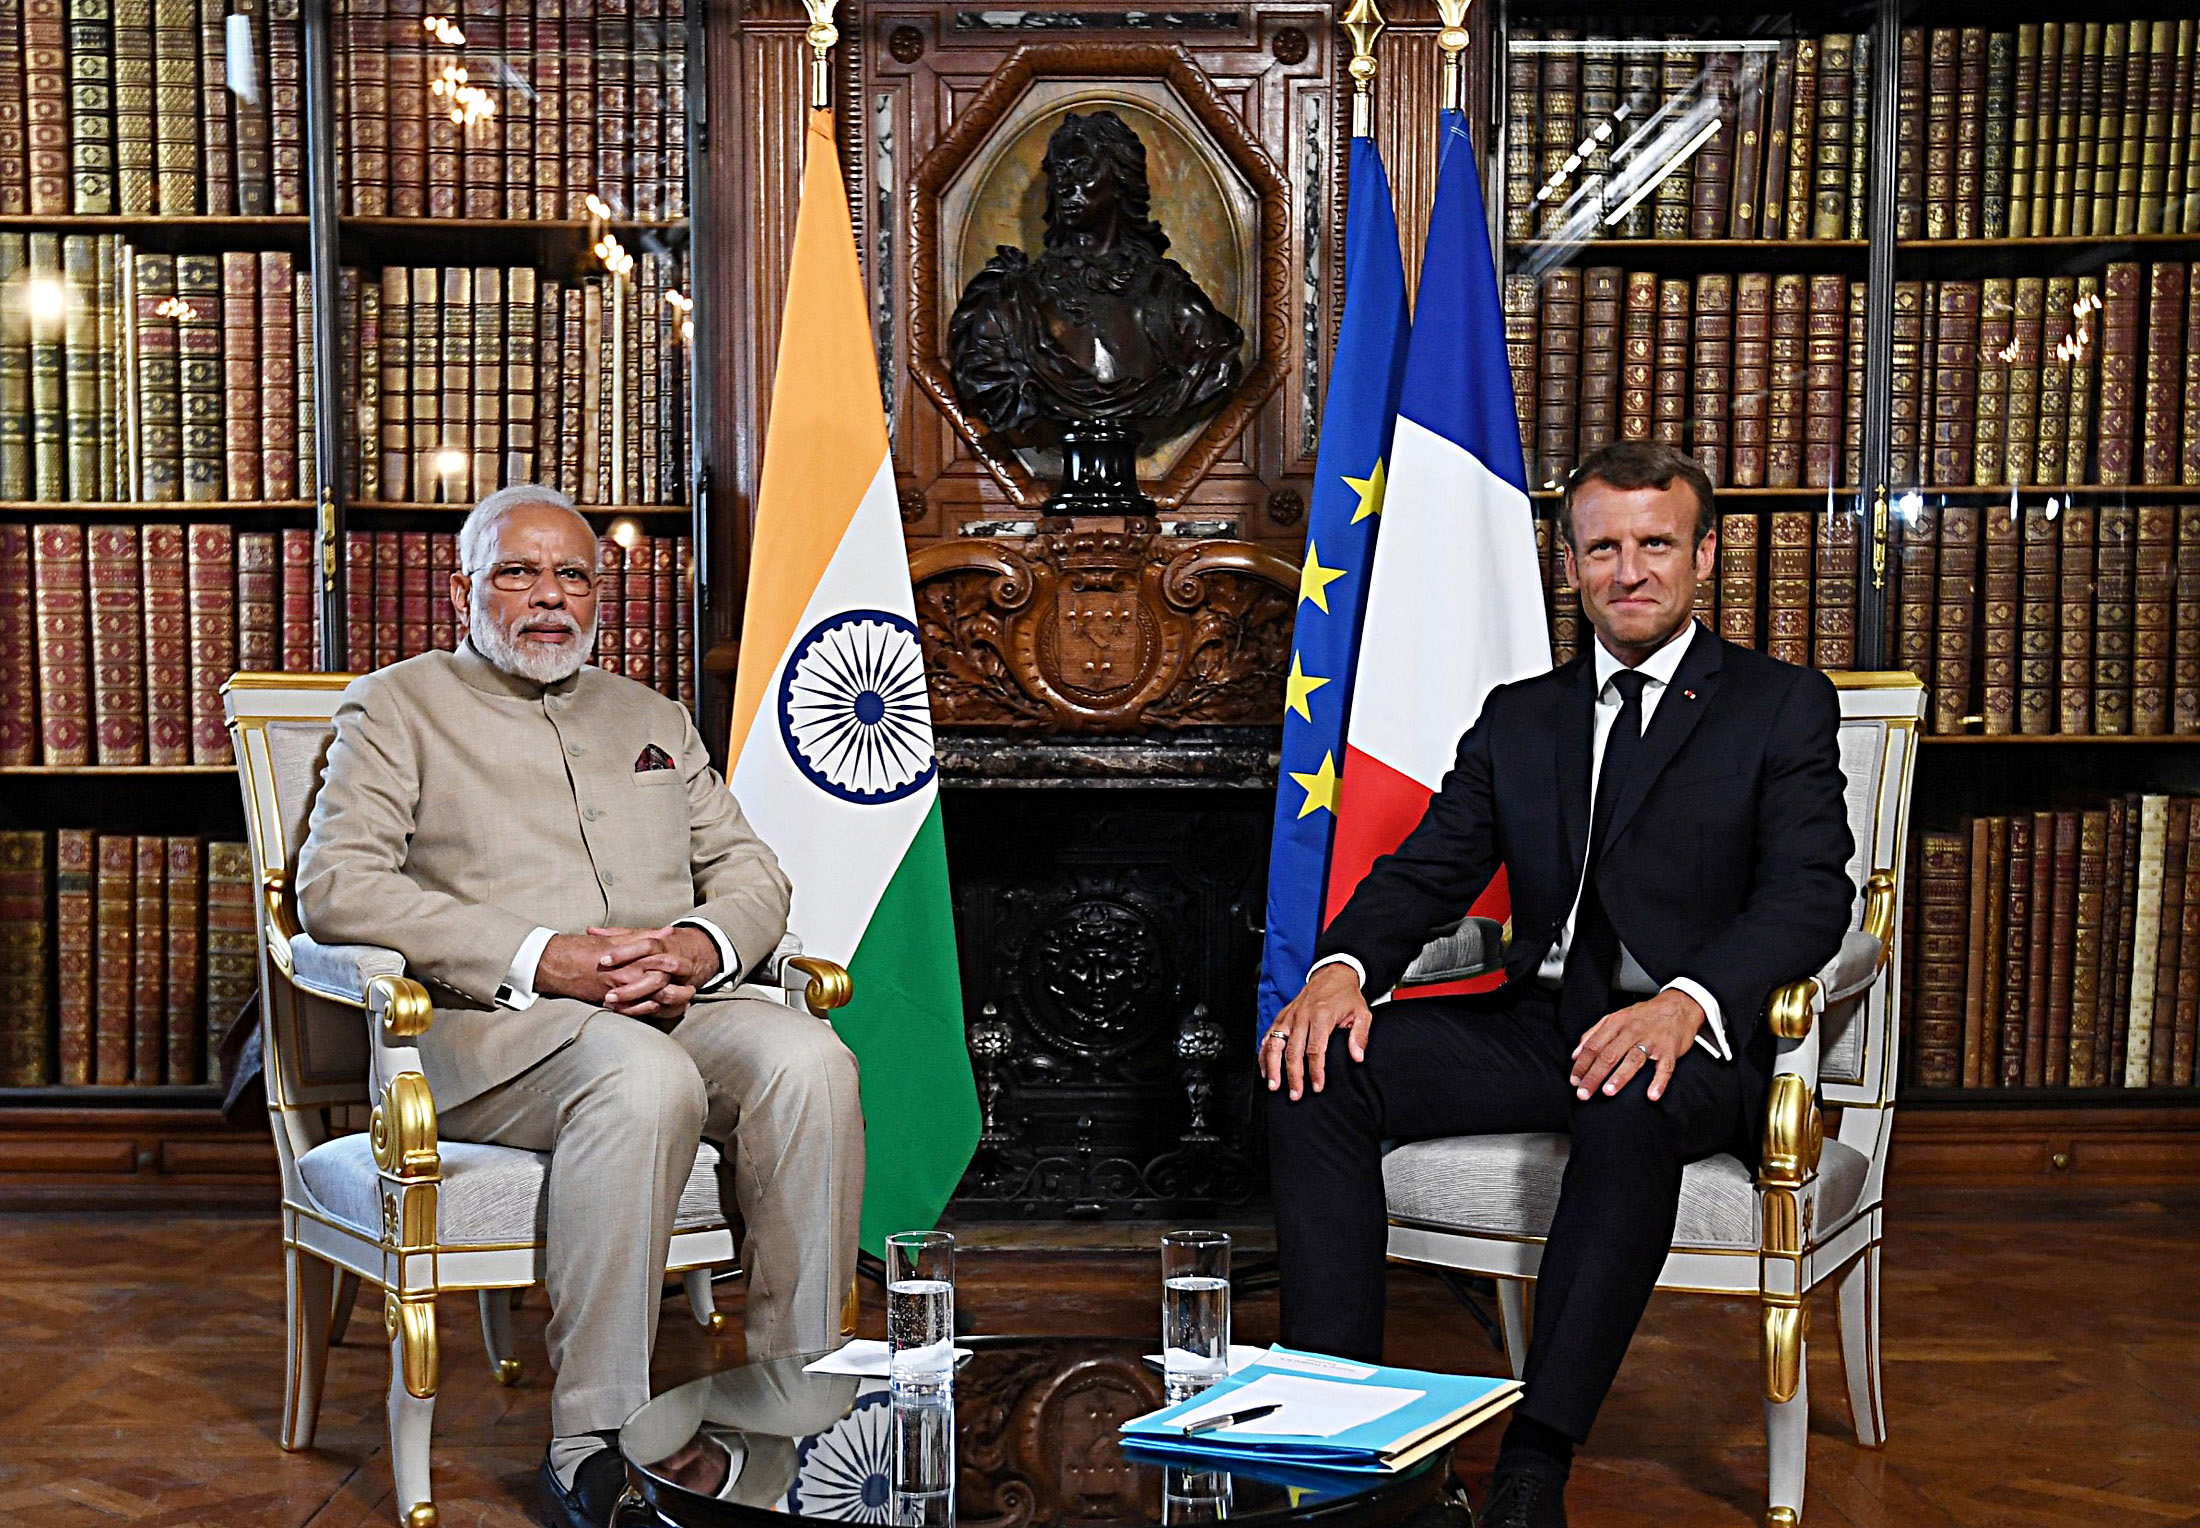 PM Modi to hold meeting with French President Macron today